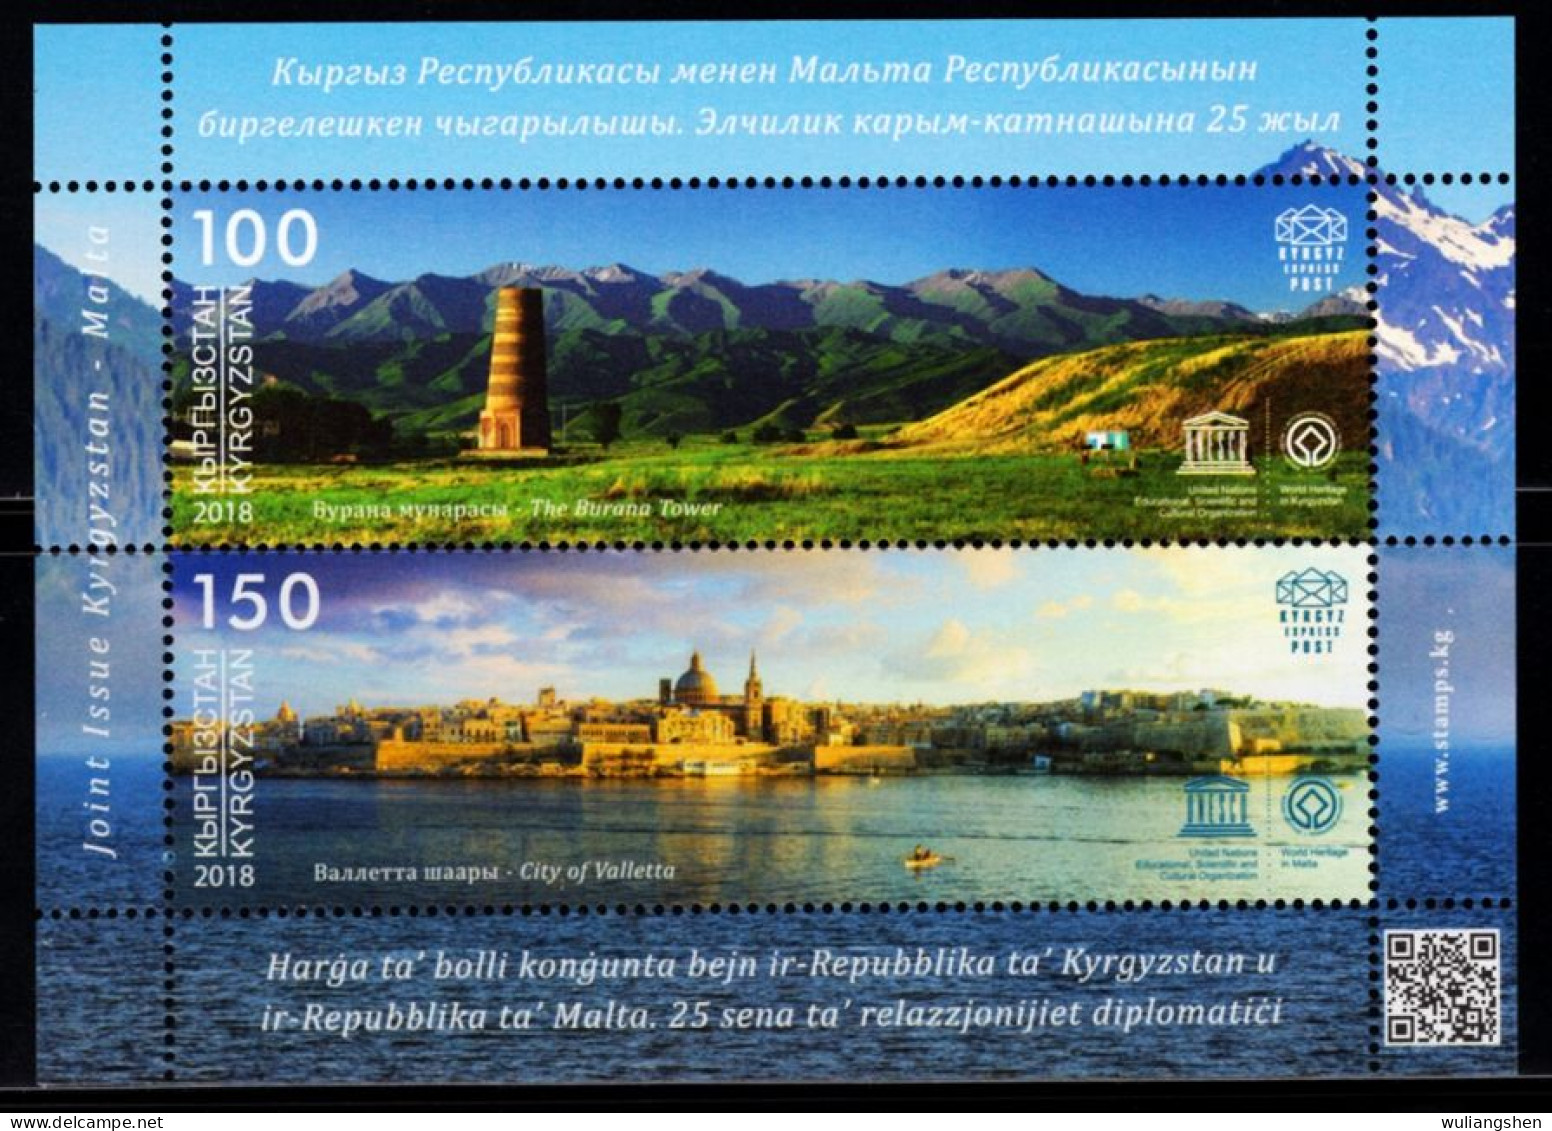 XK0256 List Of Architectural Heritage In Kyrgyzstan And Malta In 2018 MNH - Kirgizië